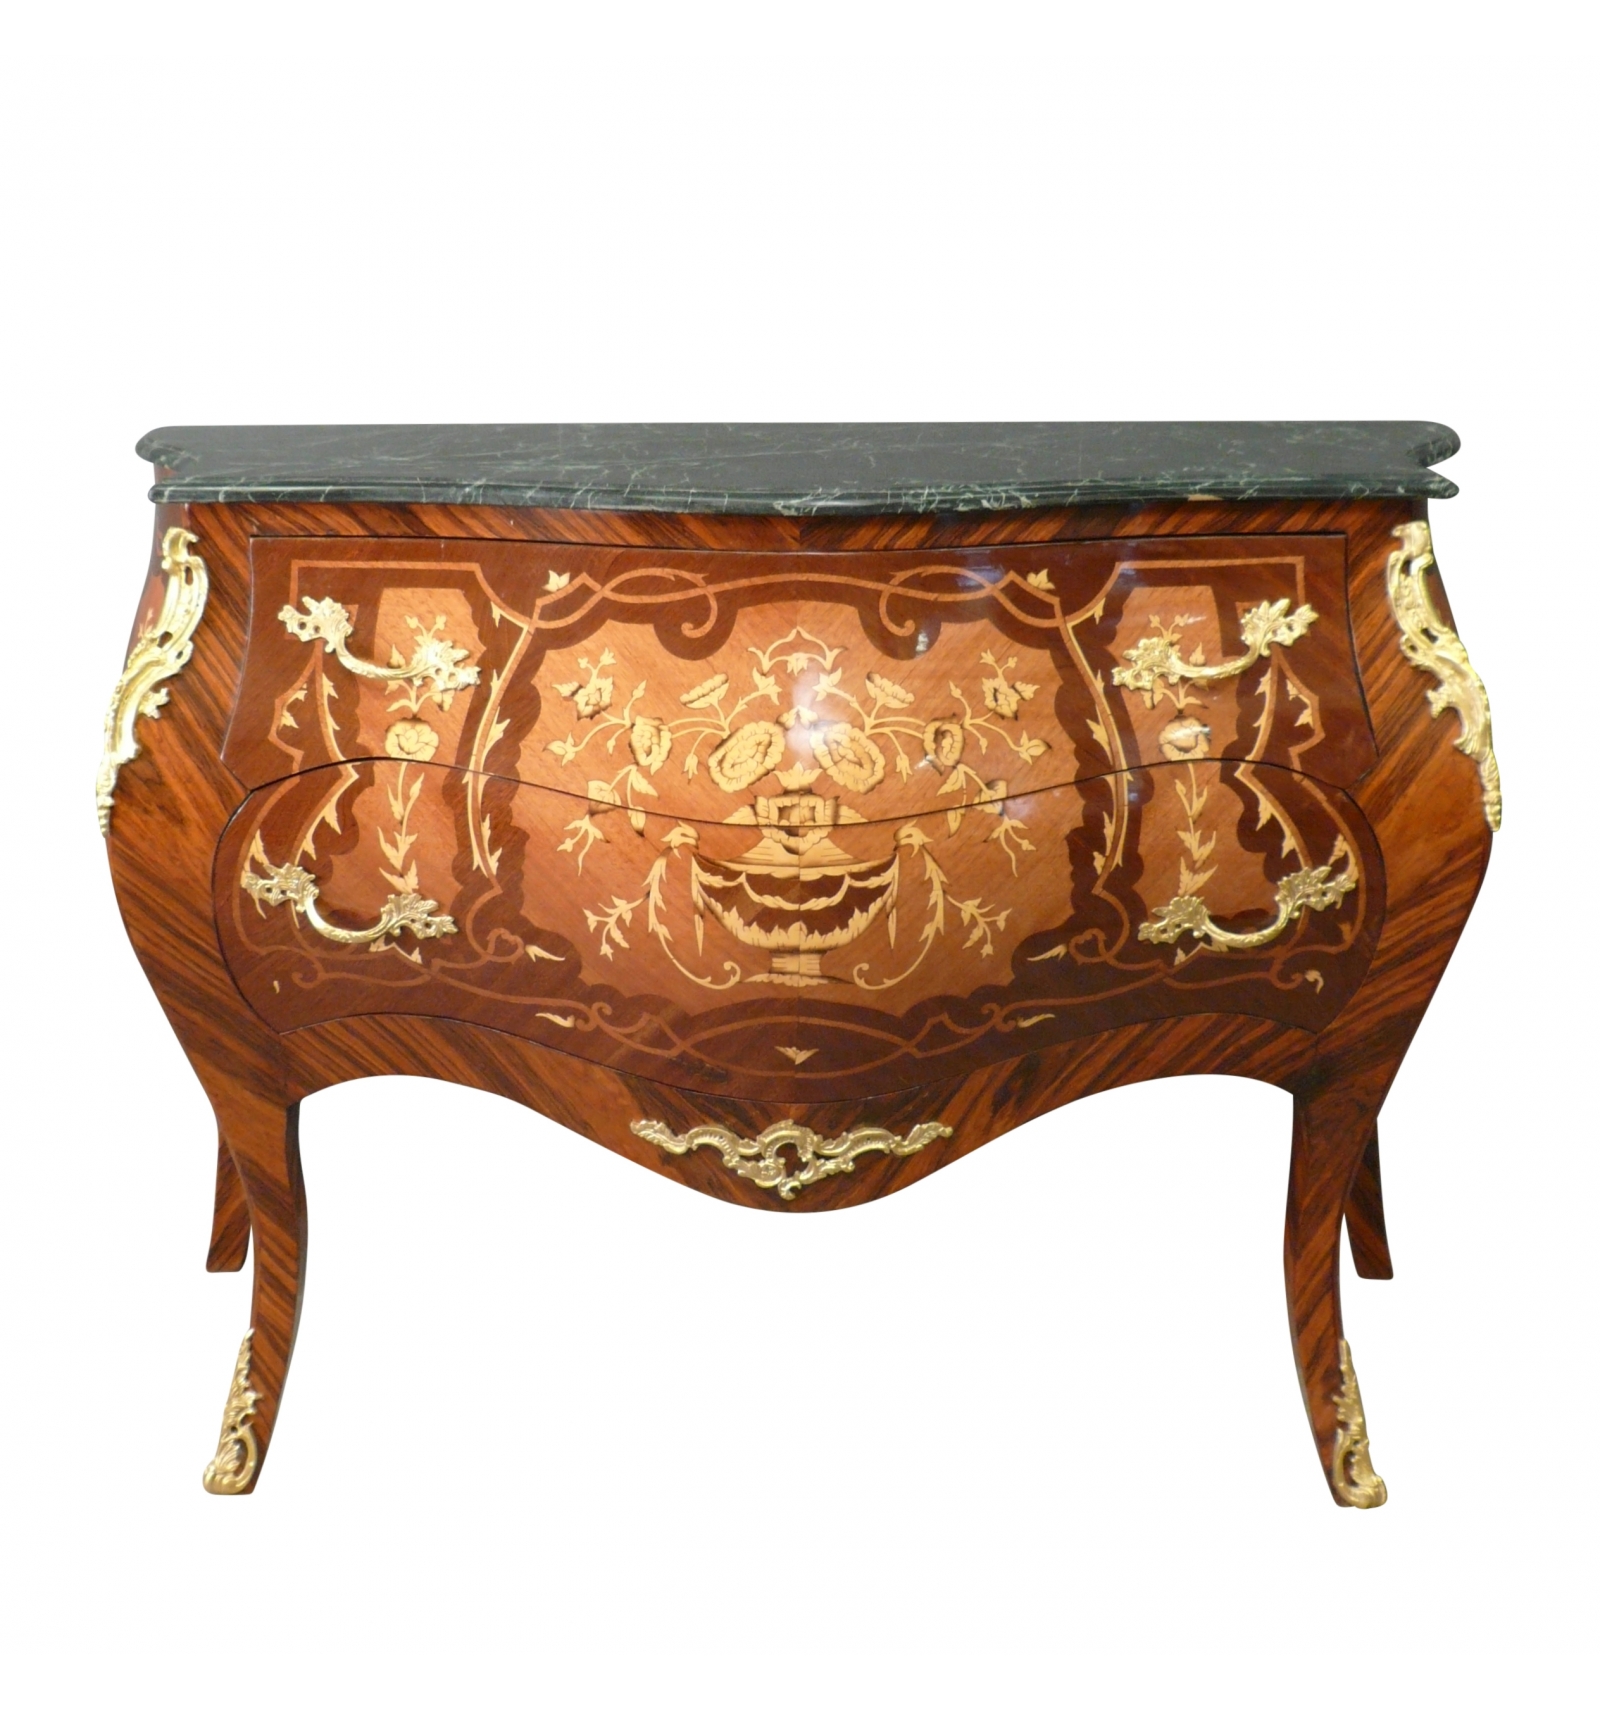 Louis XV curved chest of drawers - Louis XV furniture